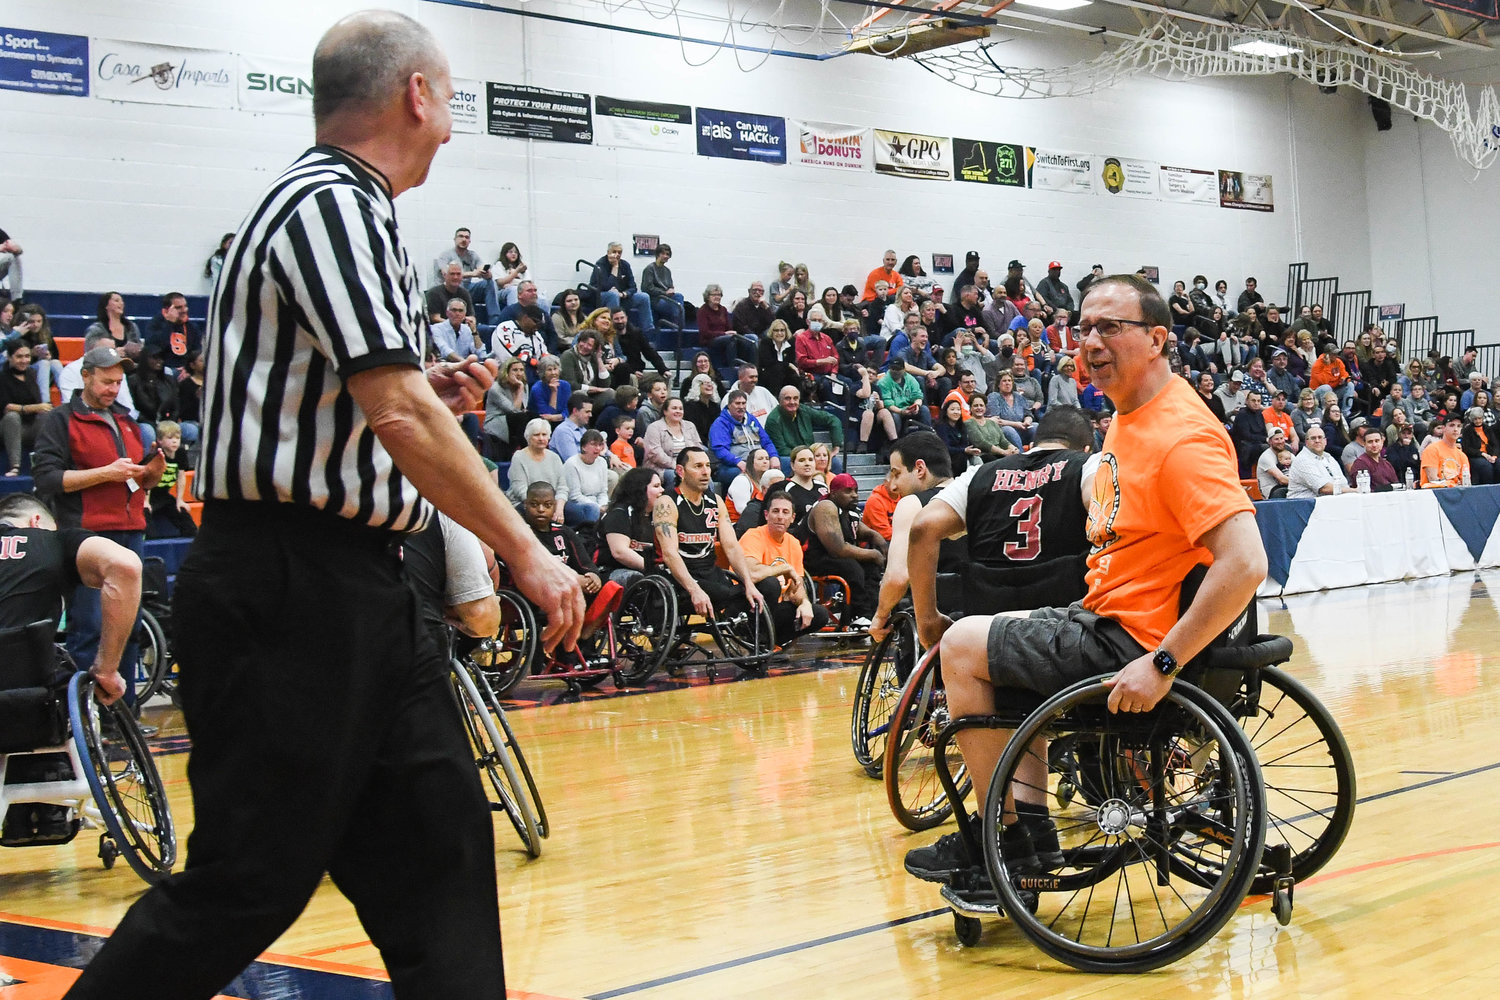 New York State Senator Joseph Griffo playfully argues a call with the referee during the 18th annual Sitrin Celebrity Wheelchair Basketball Game on Thursday night at Utica University.